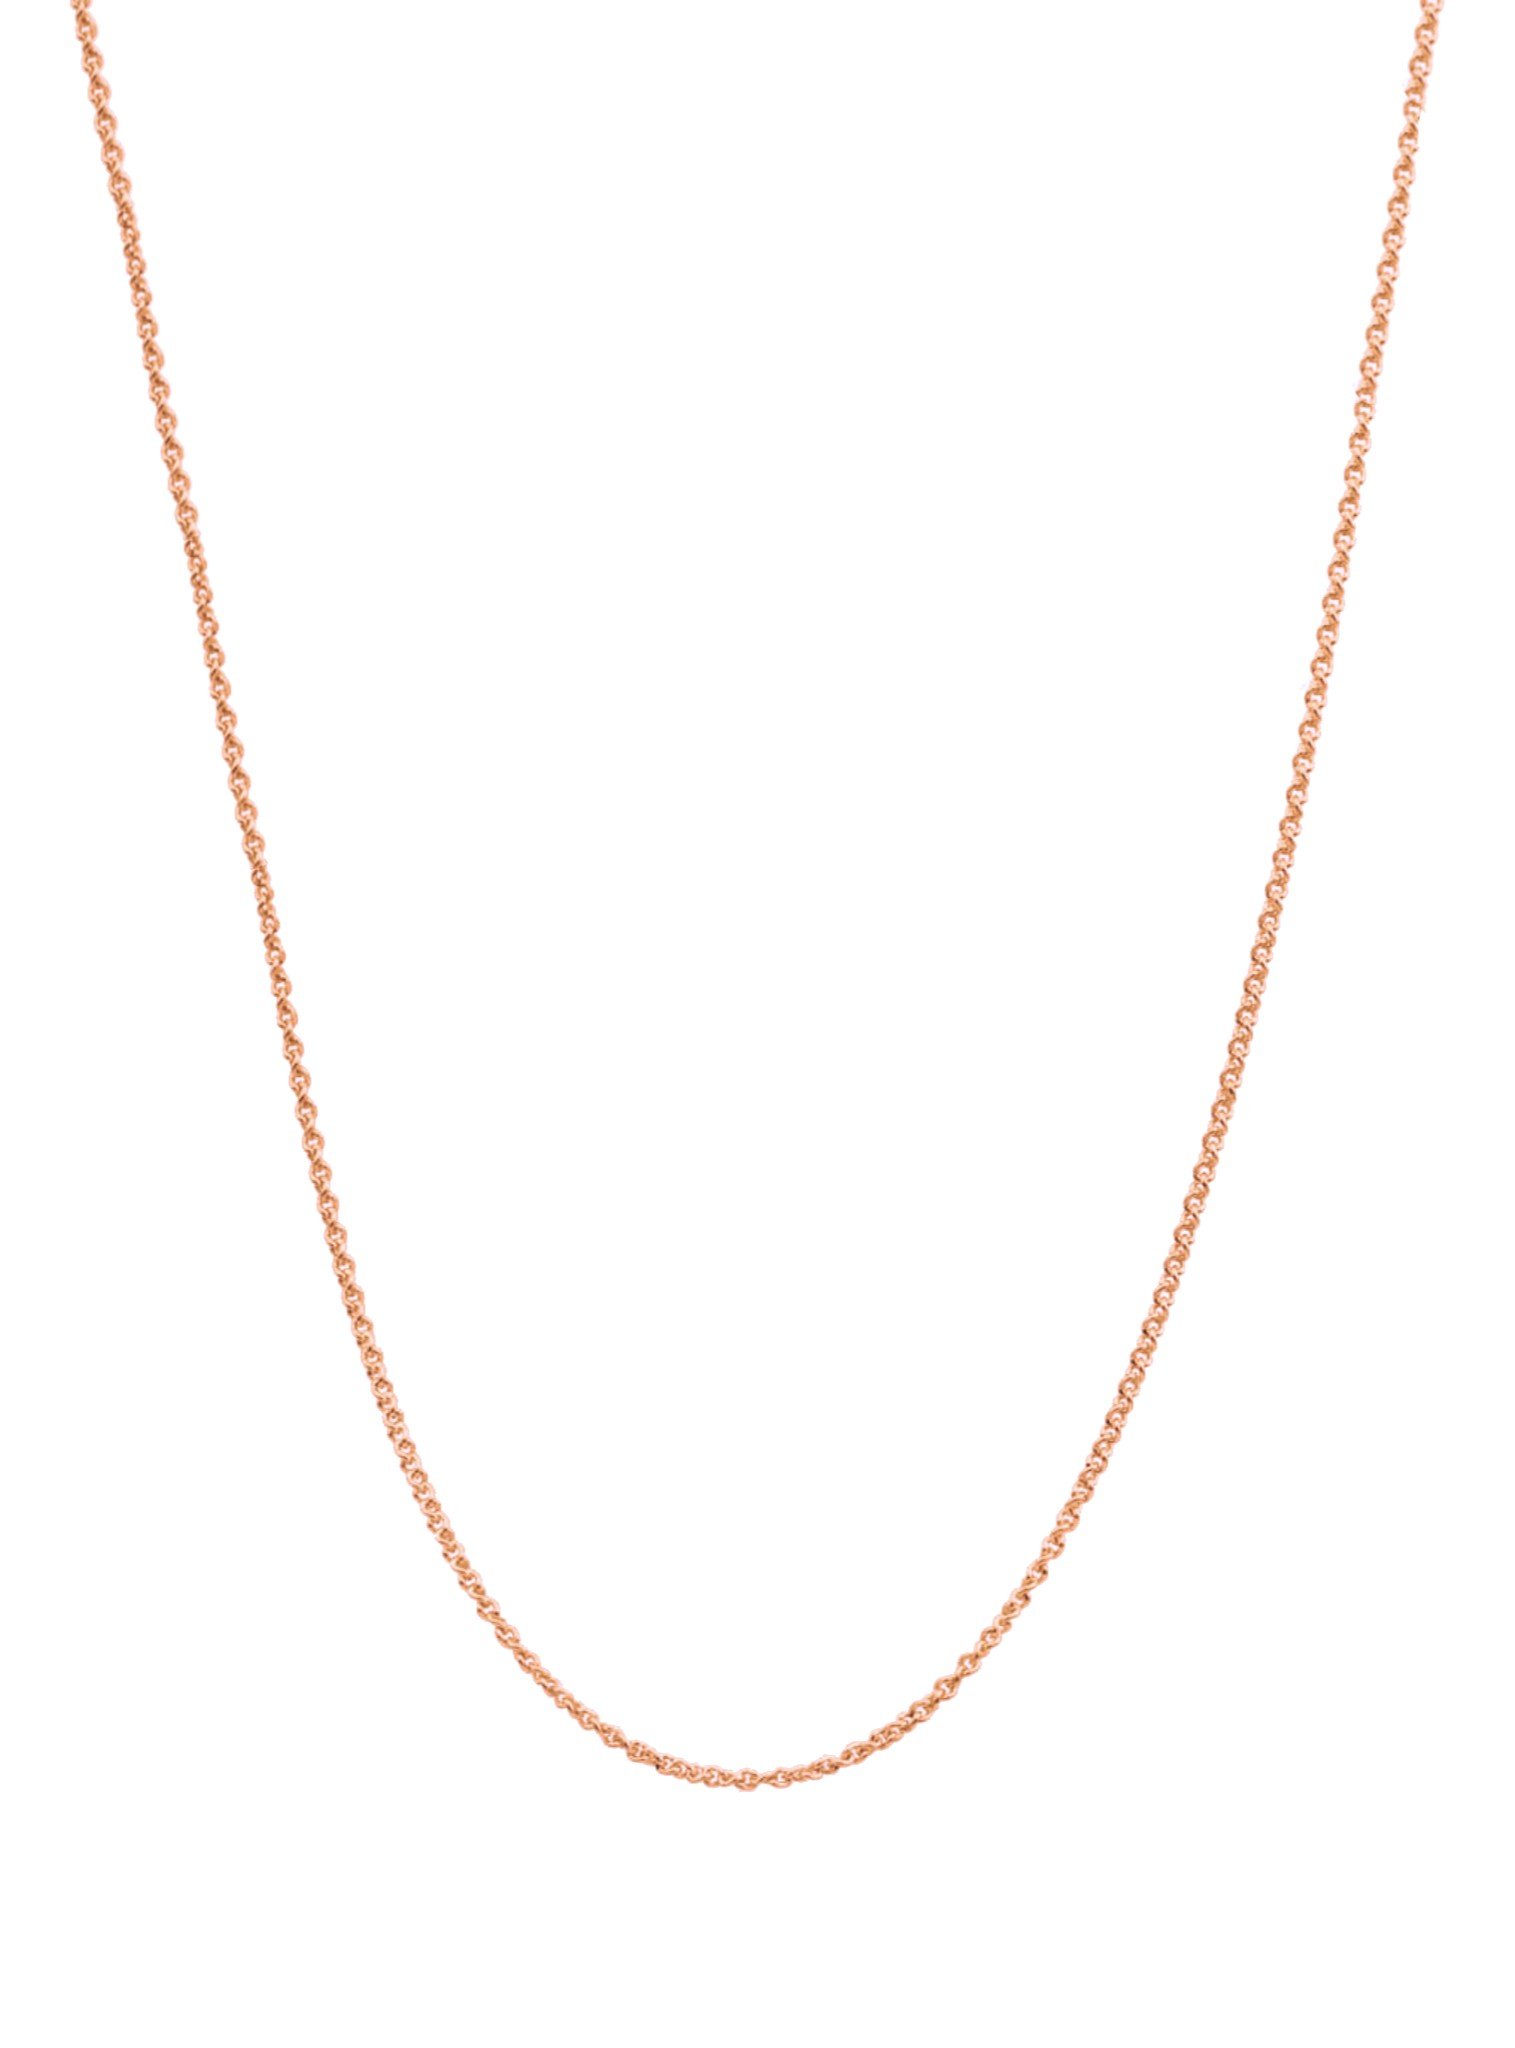 Cable Trace Necklace Chain in Solid 9ct Rose Gold All Sizes — The Jewel ...